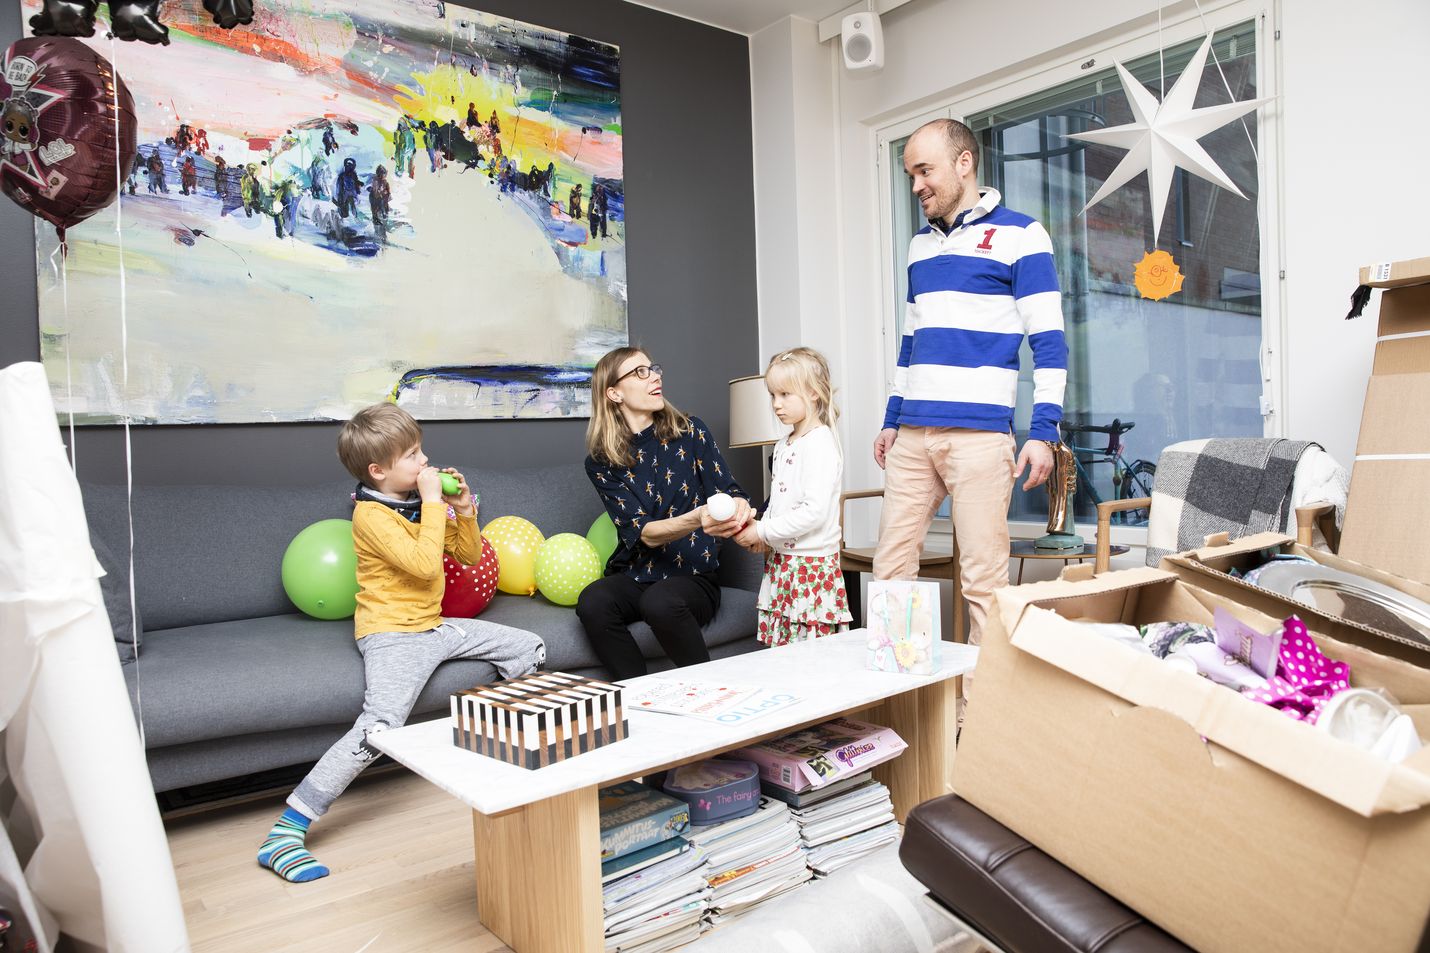 The young family of Saku Oikarinen and Heini Ynnilä with children Eliel Ynnilä and Linnea Ynnilä celebrated vappu at home in Jätkäsaari district of Helsinki. The parents said they had scaled back some of their consuming connected to their moving house, due to the corona virus pandemic.